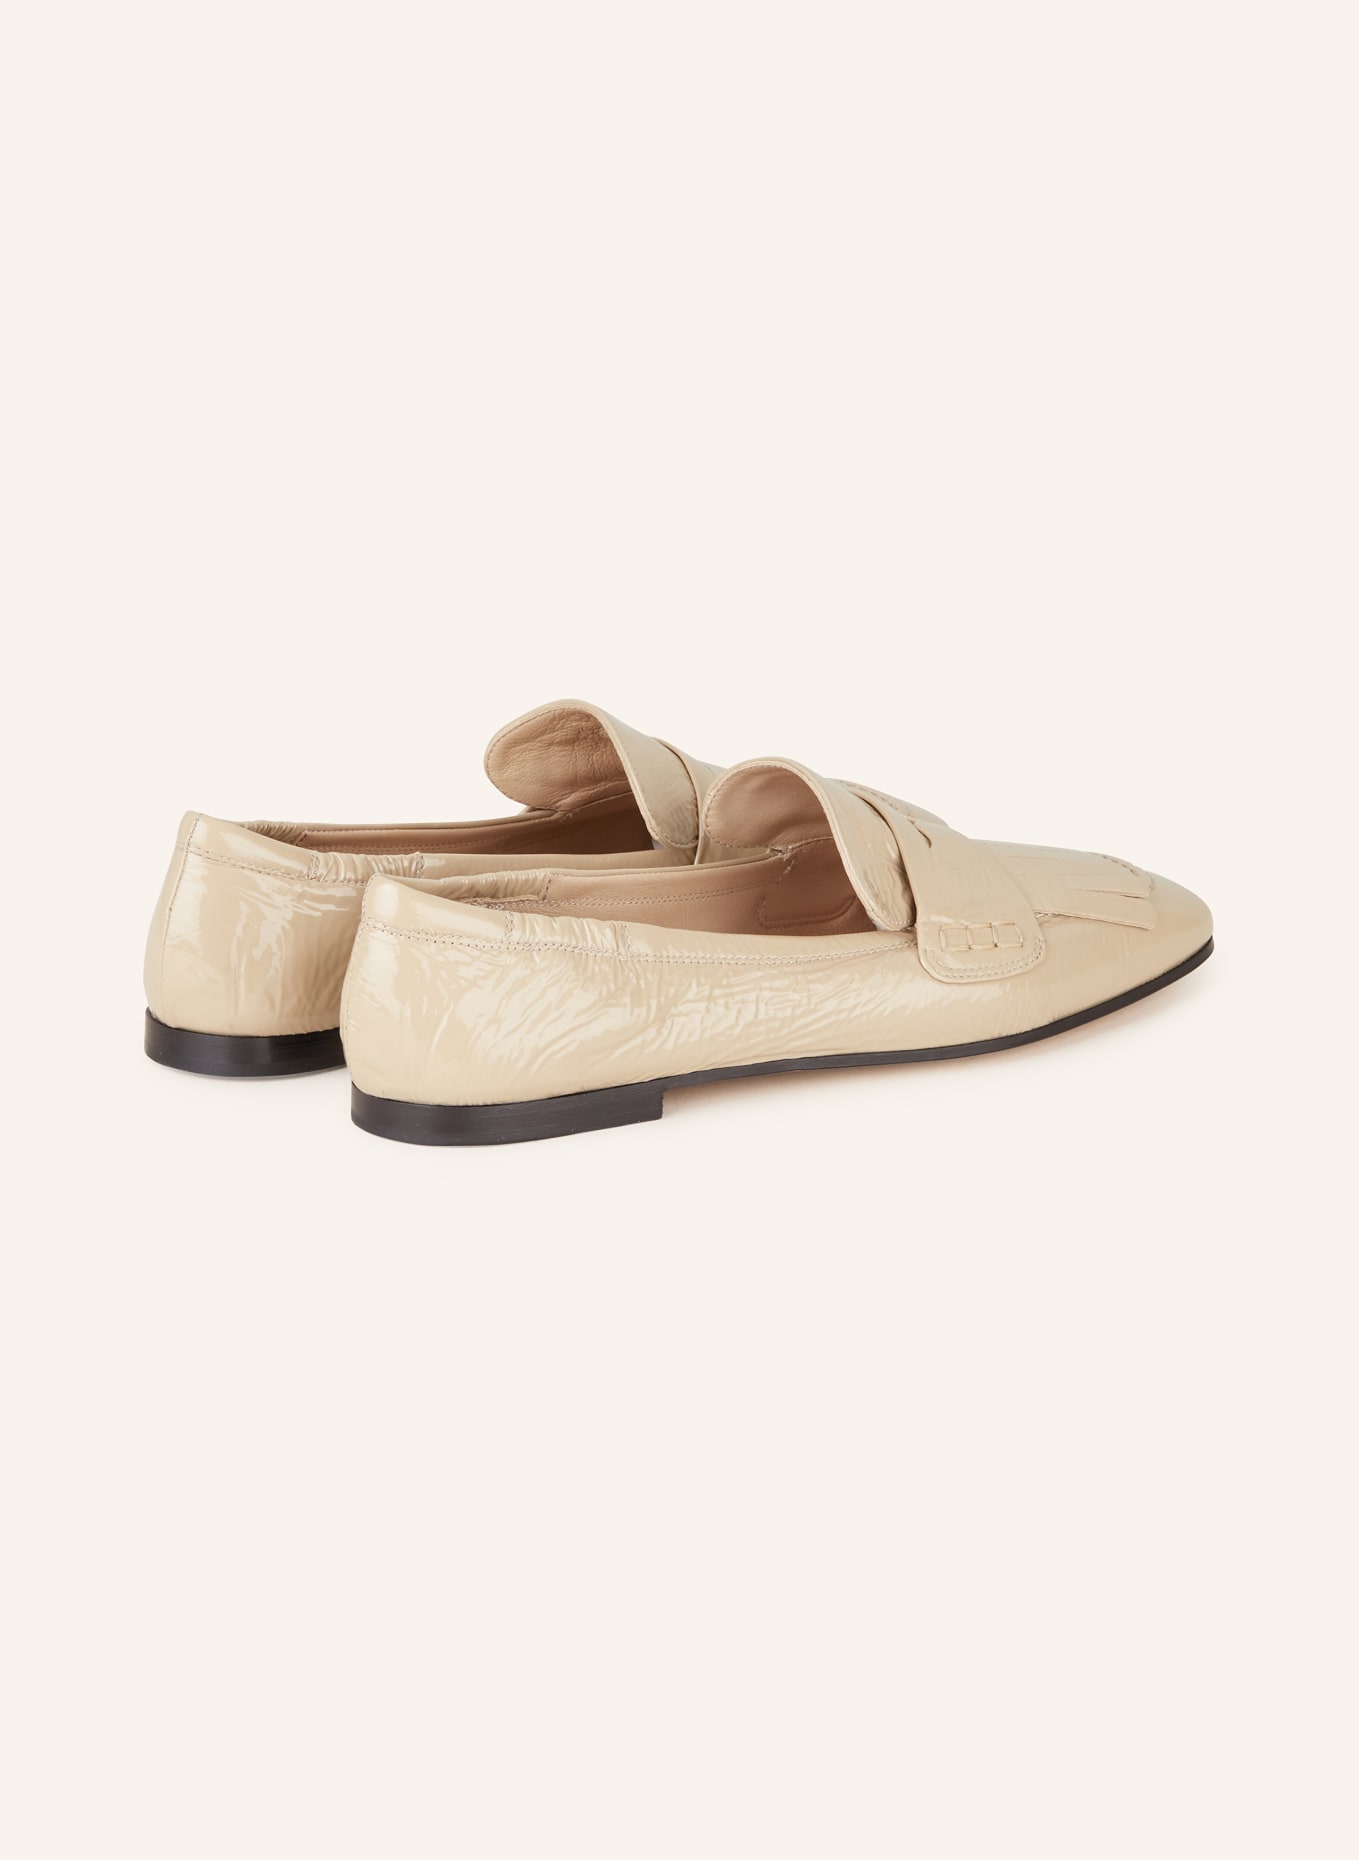 POMME D'OR Penny-Loafer ANGIE, Farbe: BEIGE (Bild 2)